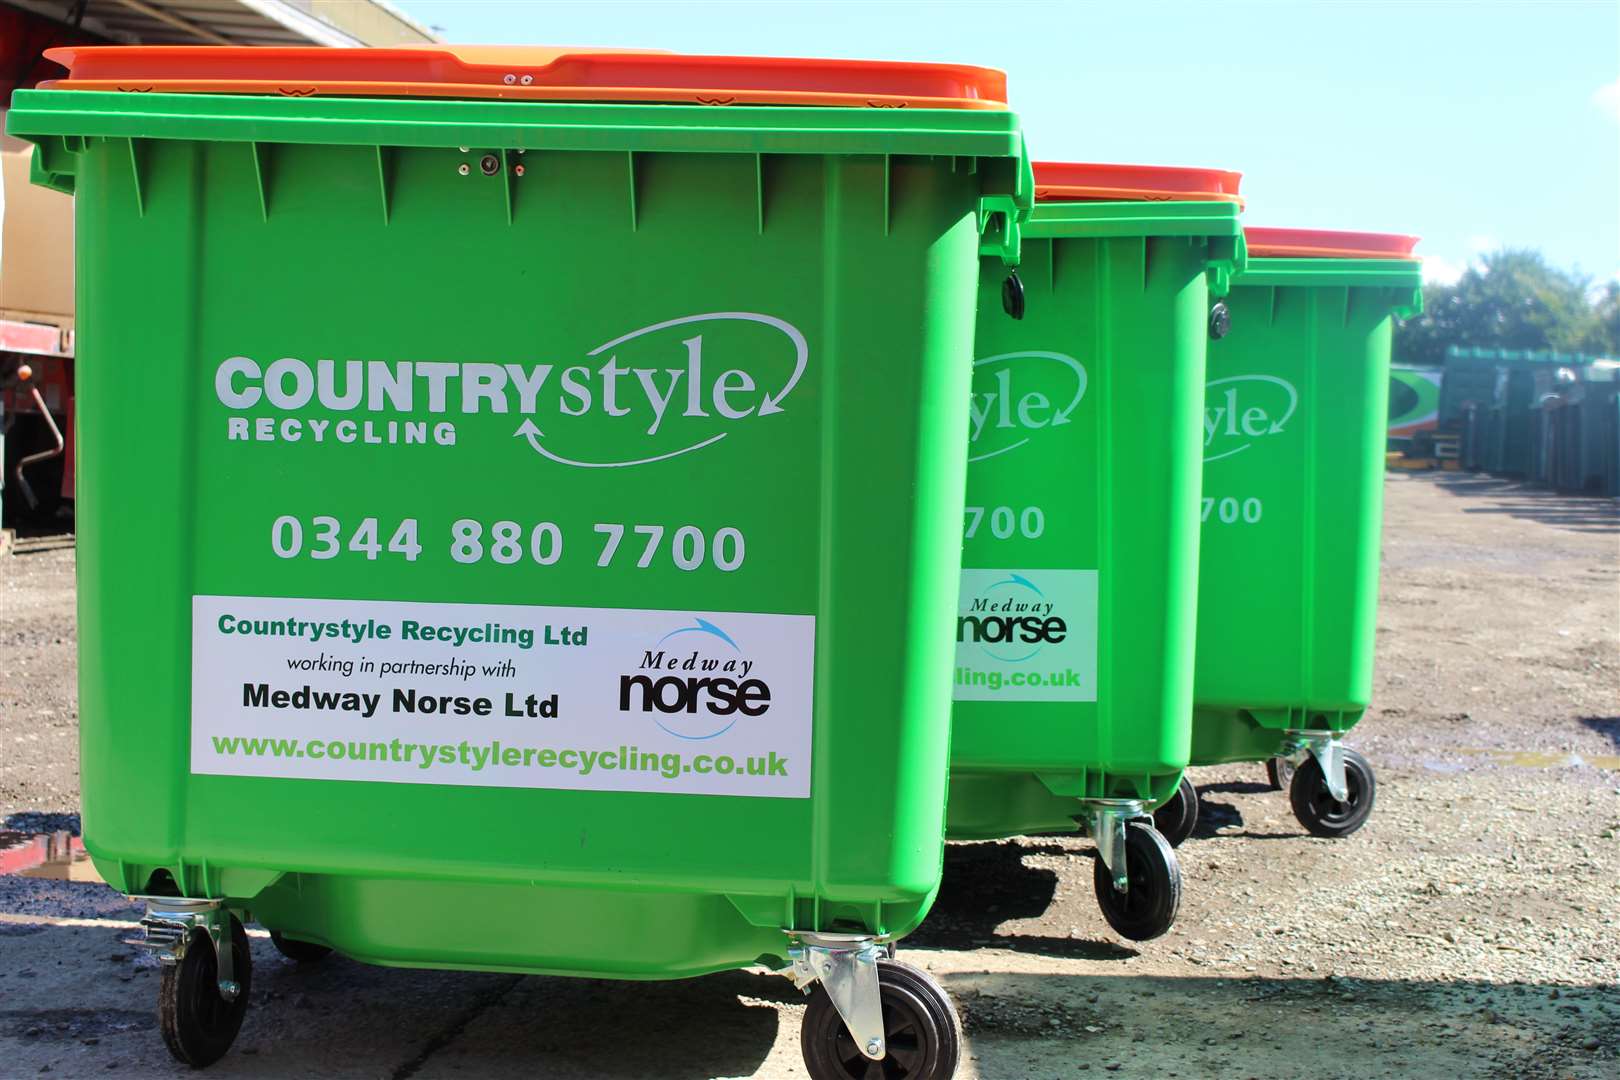 Countrystyle has an £800,000 contract with Medway Norse, carrying out 7,900 general waste lifts a year and 2,000 recycling collections